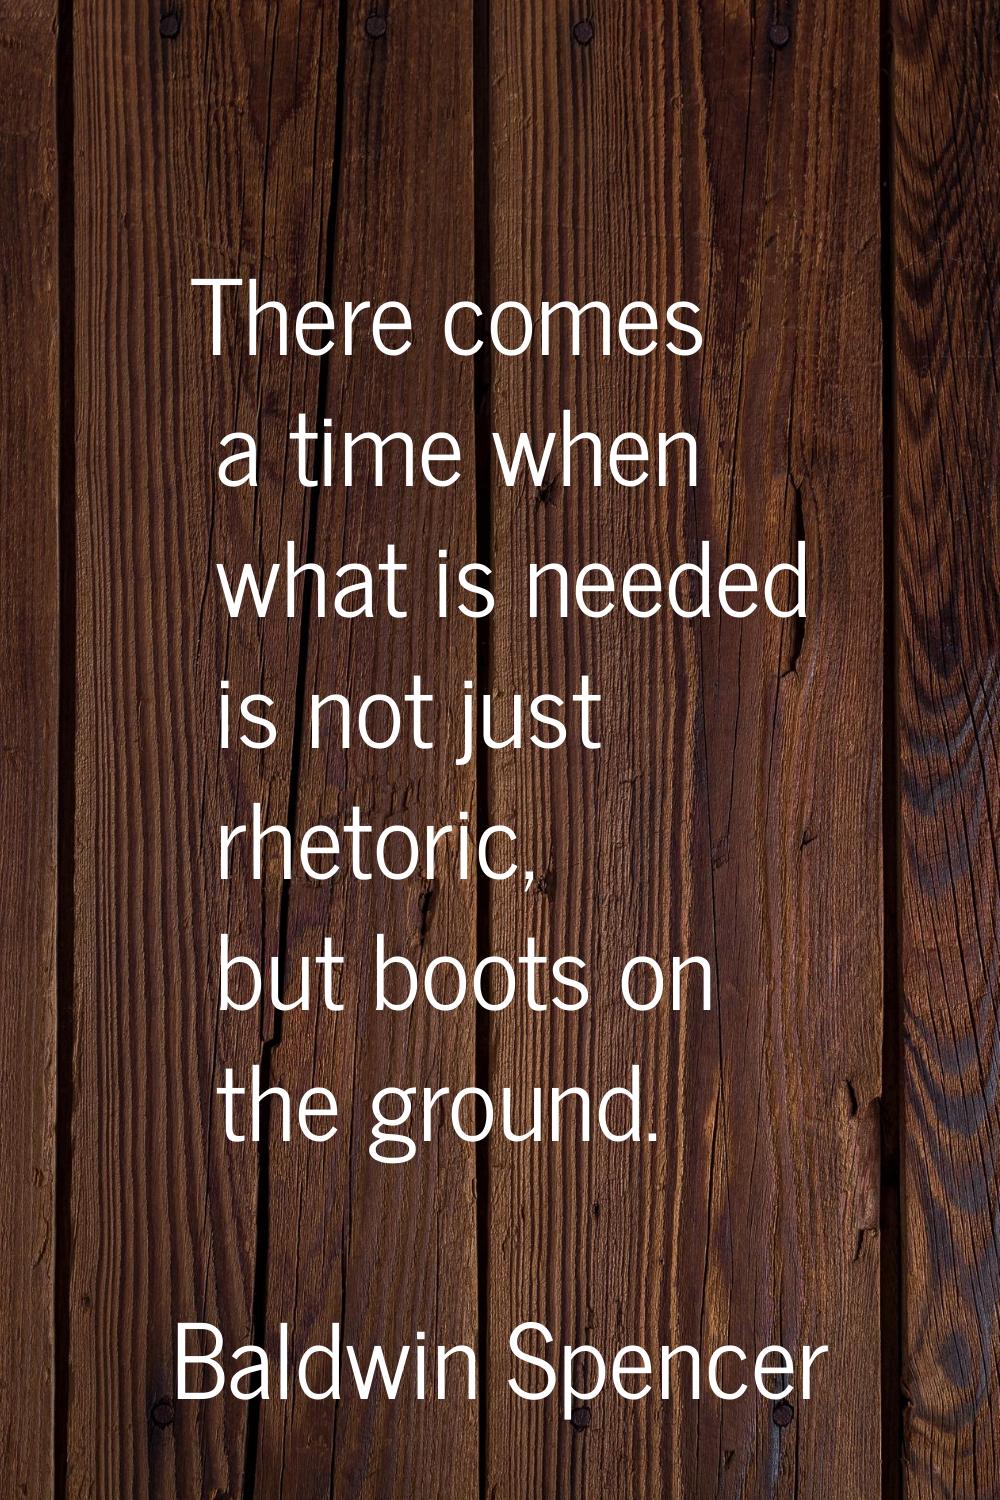 There comes a time when what is needed is not just rhetoric, but boots on the ground.